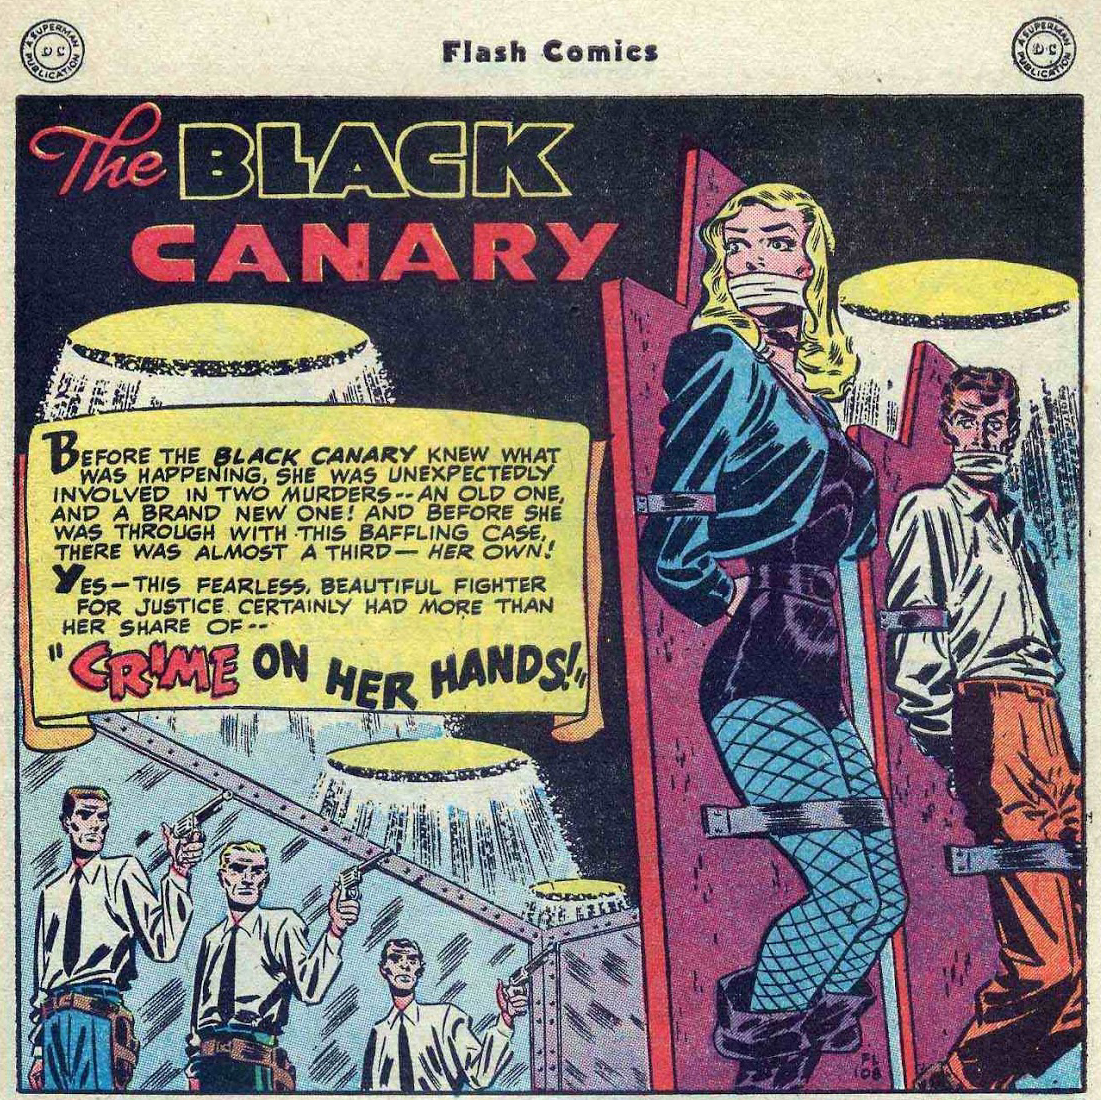 The Black Canary.